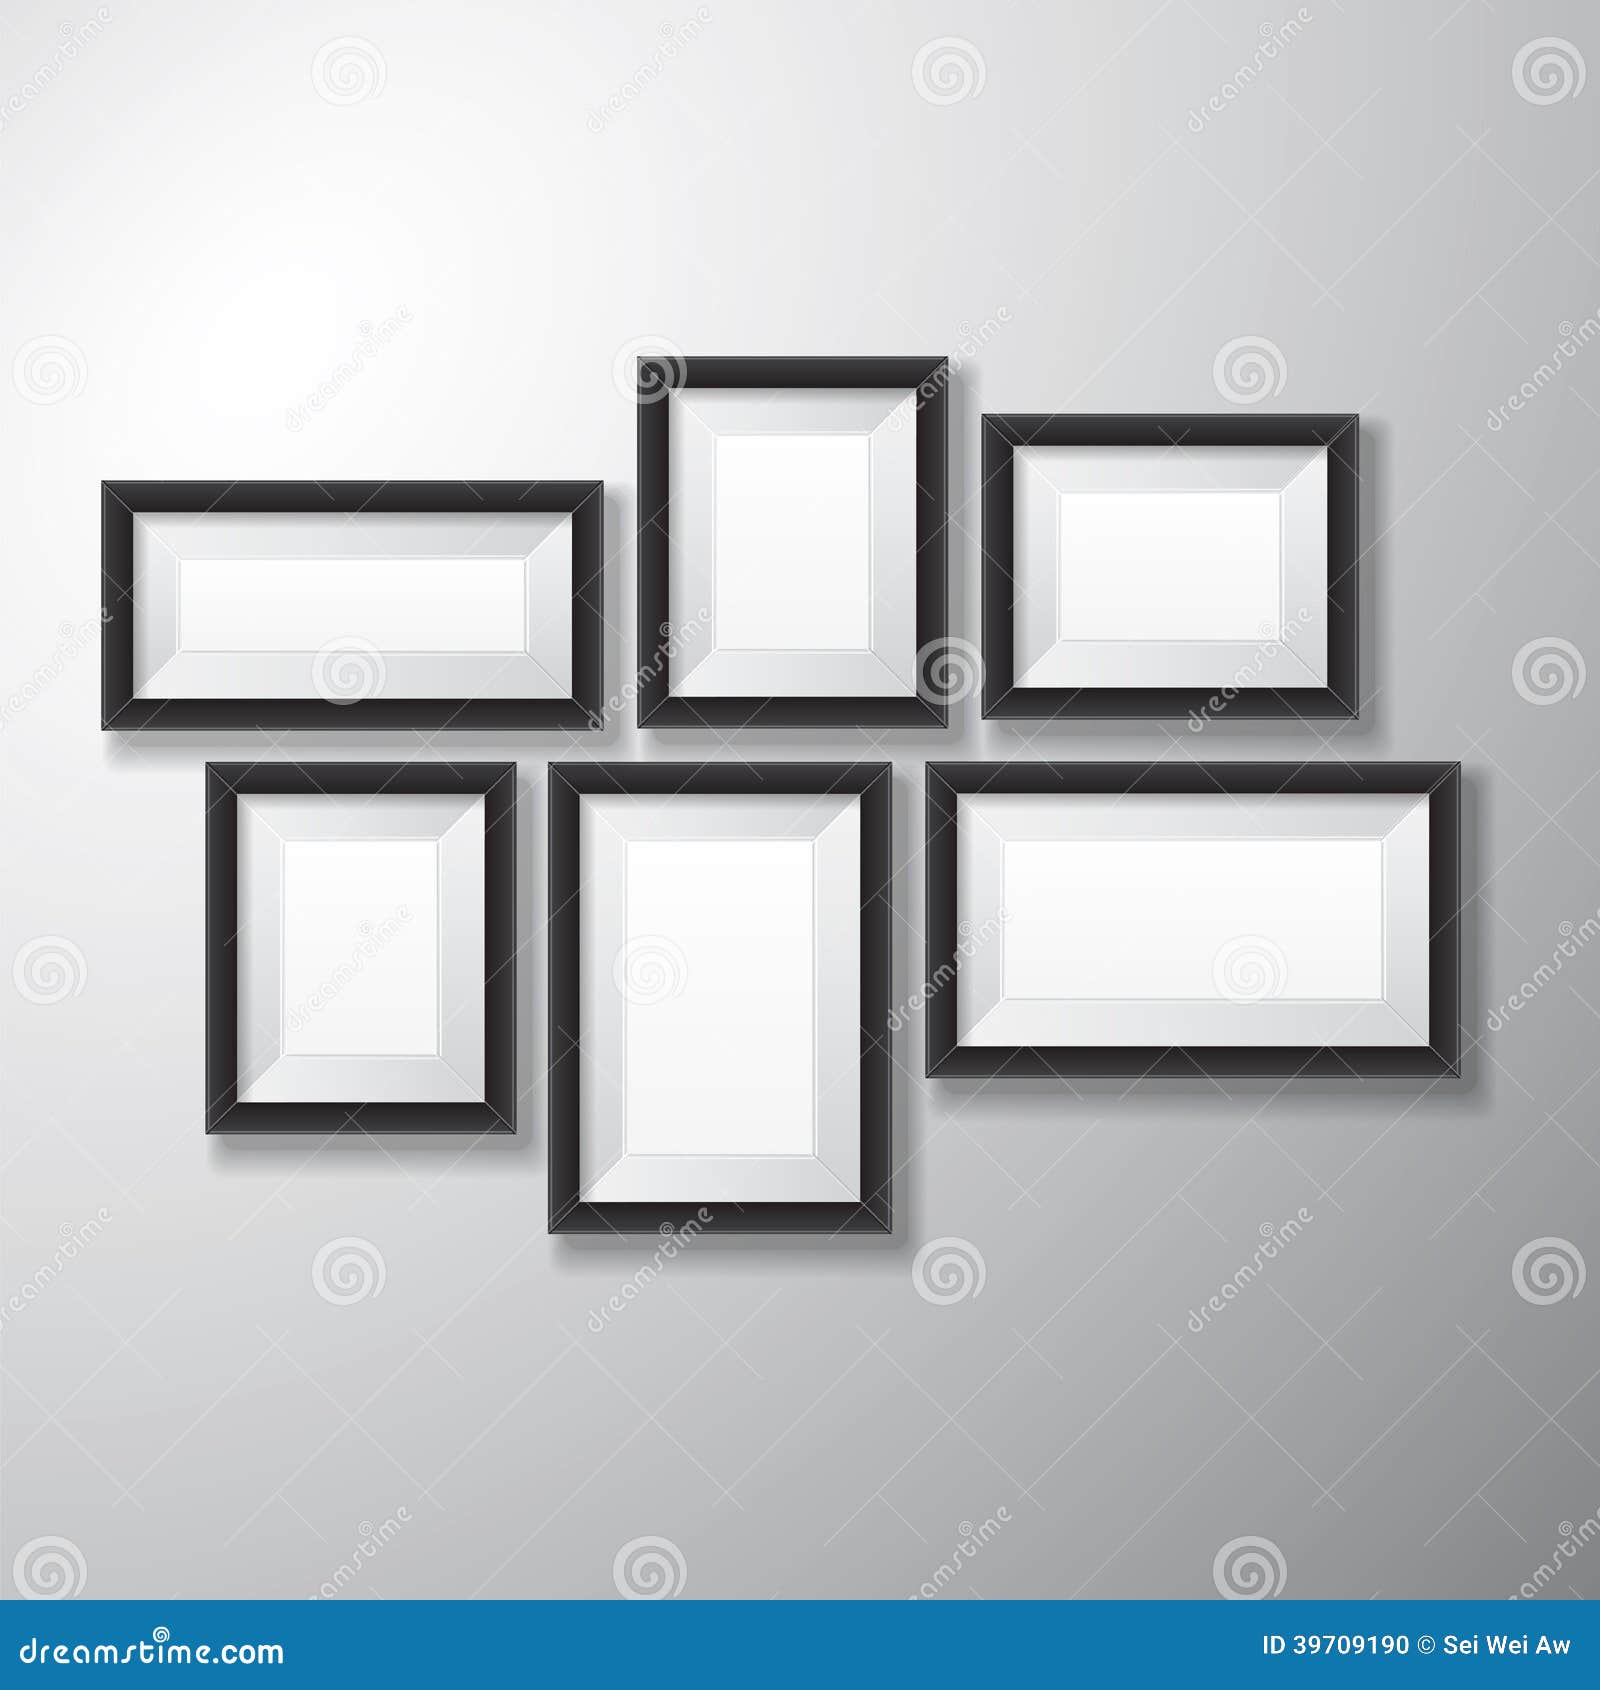 picture frames black variety